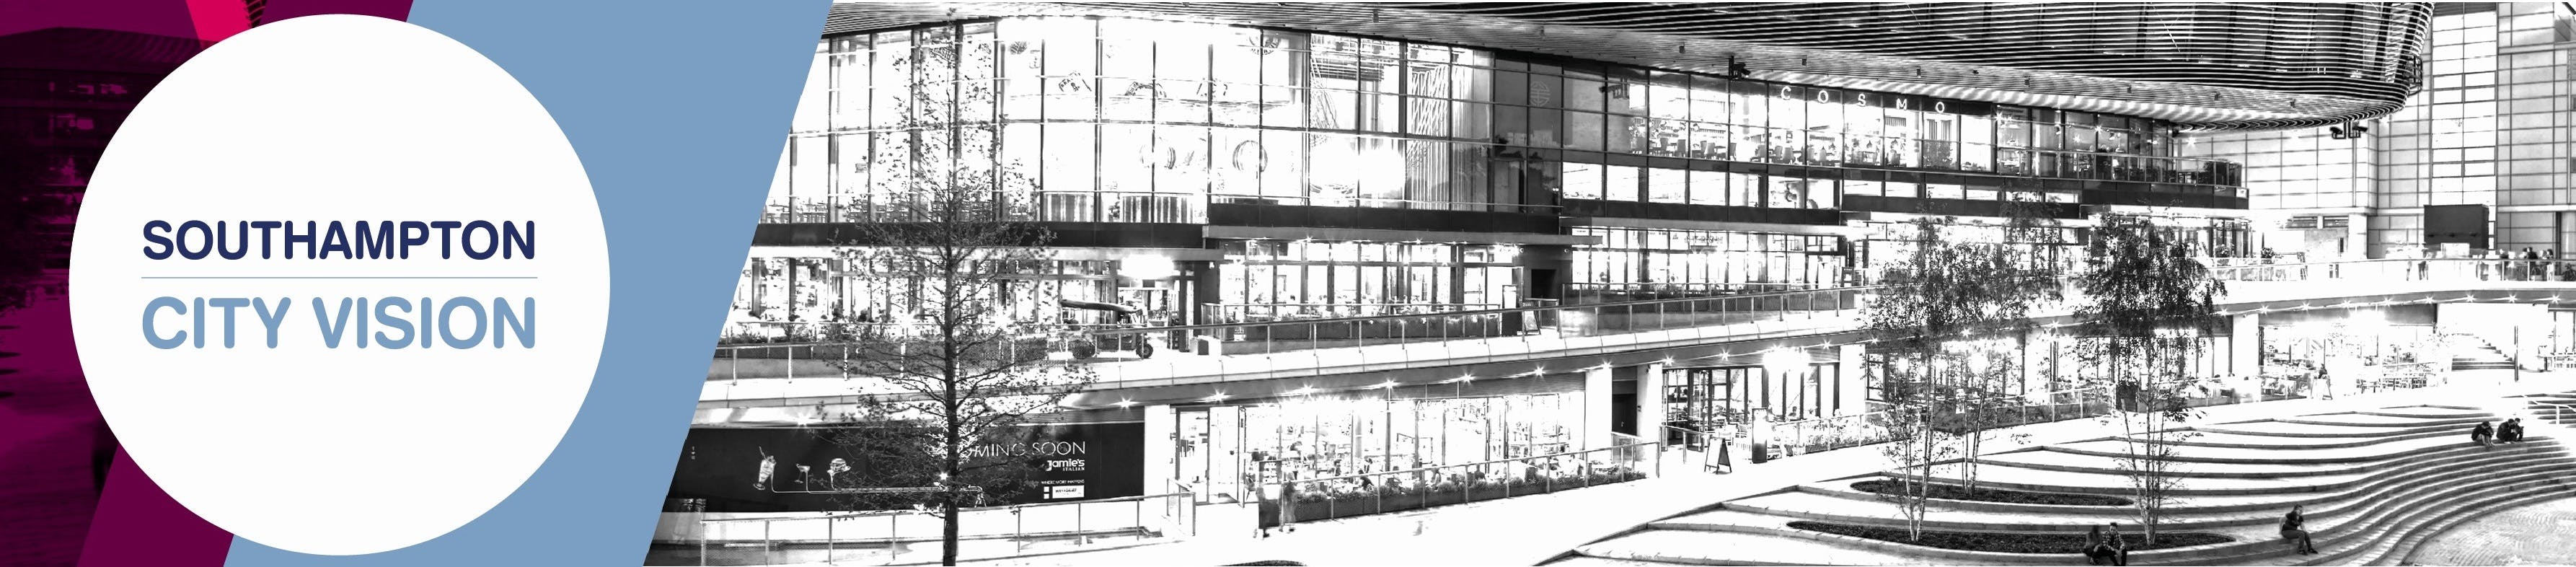 Southampton City Vision. Black and white sketch of the West Quay shopping centre.